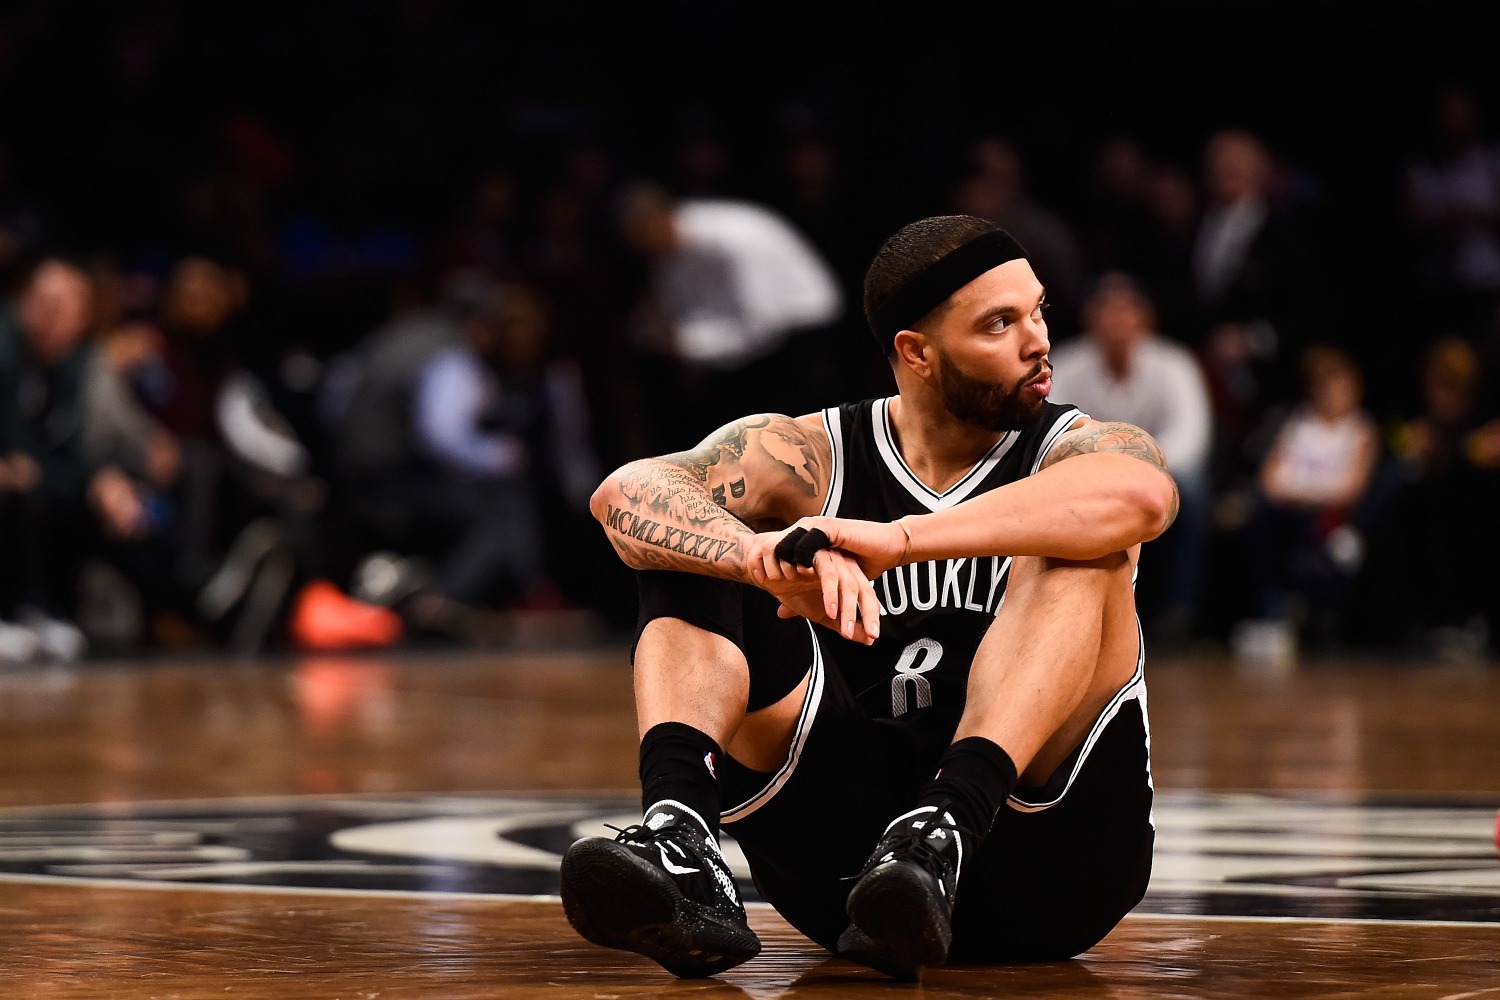 Deron Williams made a ton of money from the Nets to never play for them again.